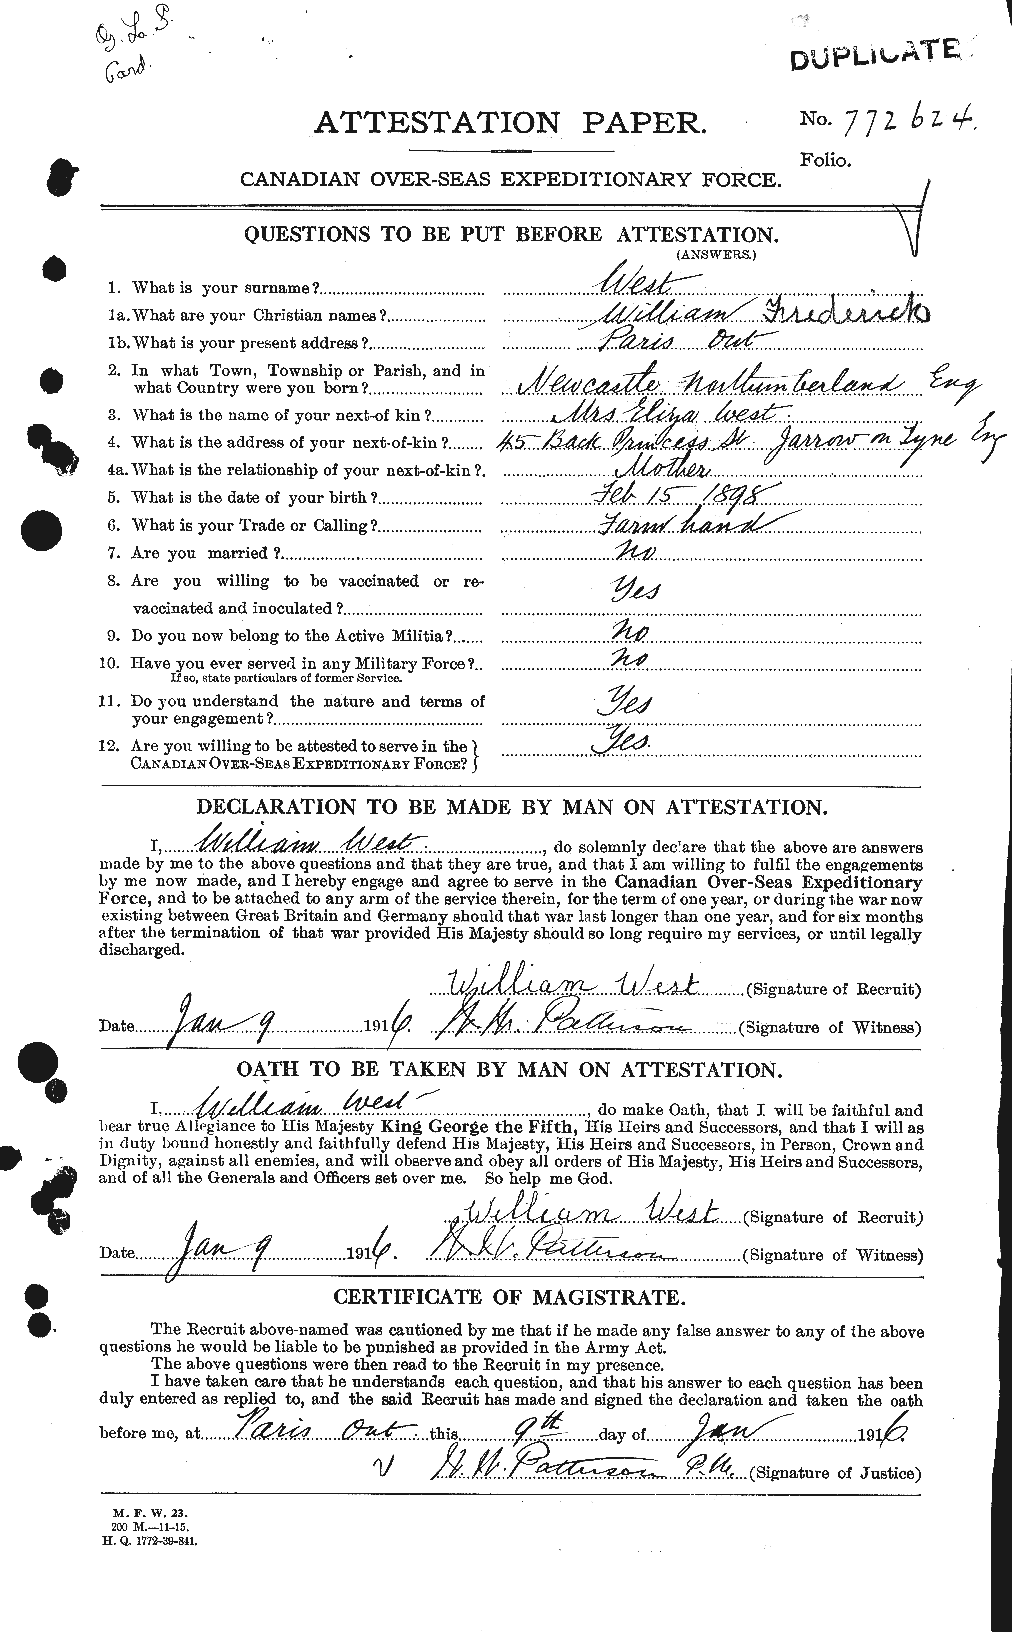 Personnel Records of the First World War - CEF 668004a